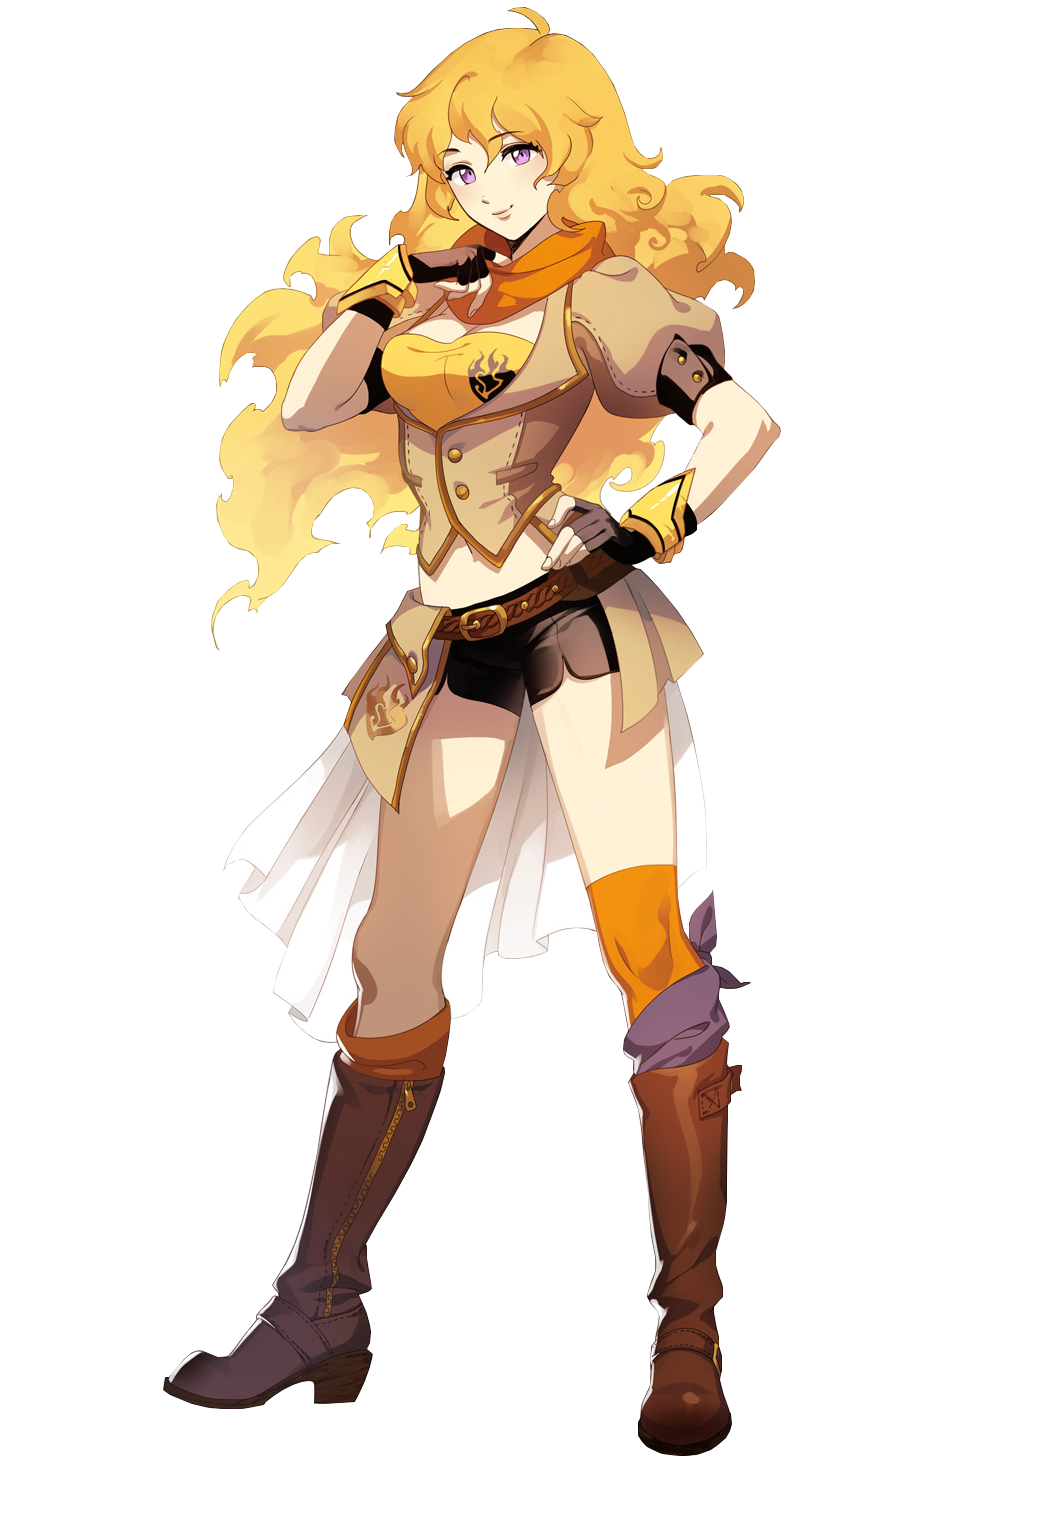 Yang xiao long rwby yellow render by andreogami5-d7zcul7